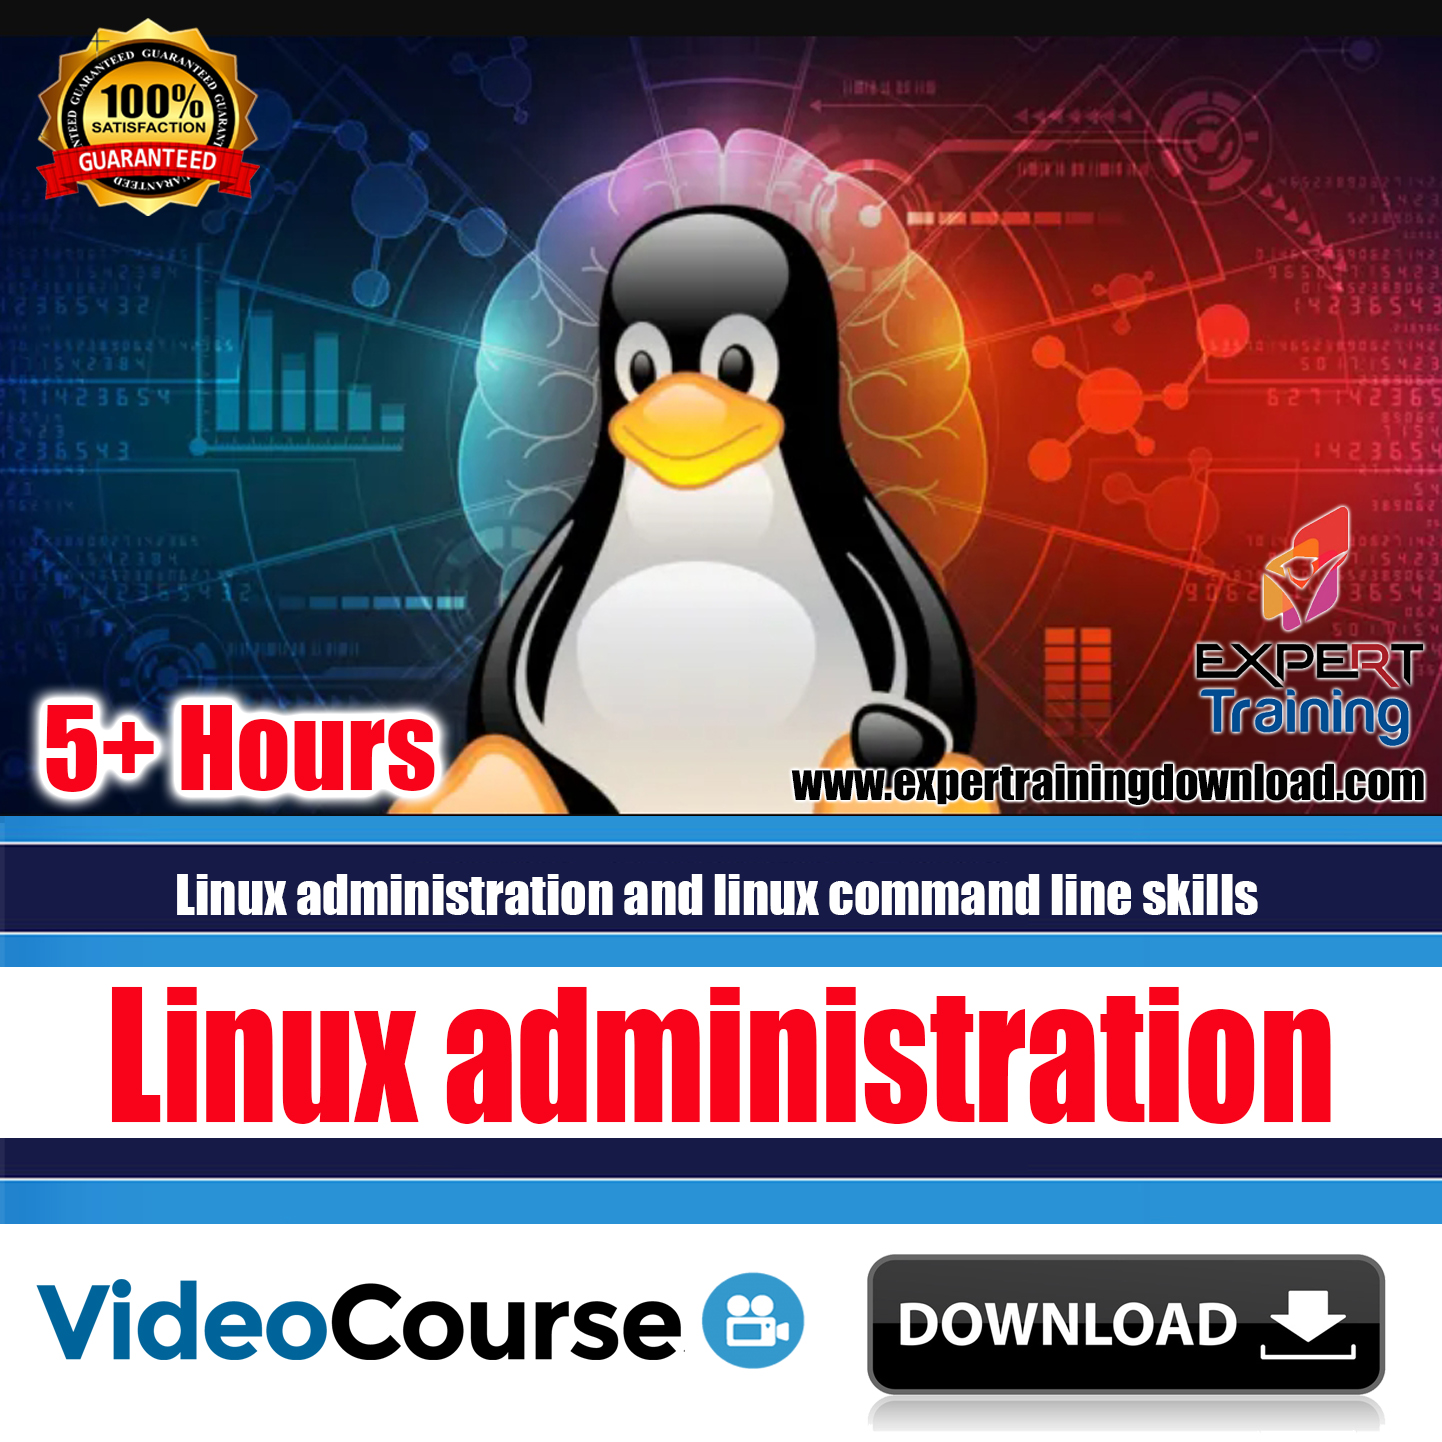 Linux administration and linux command line skills